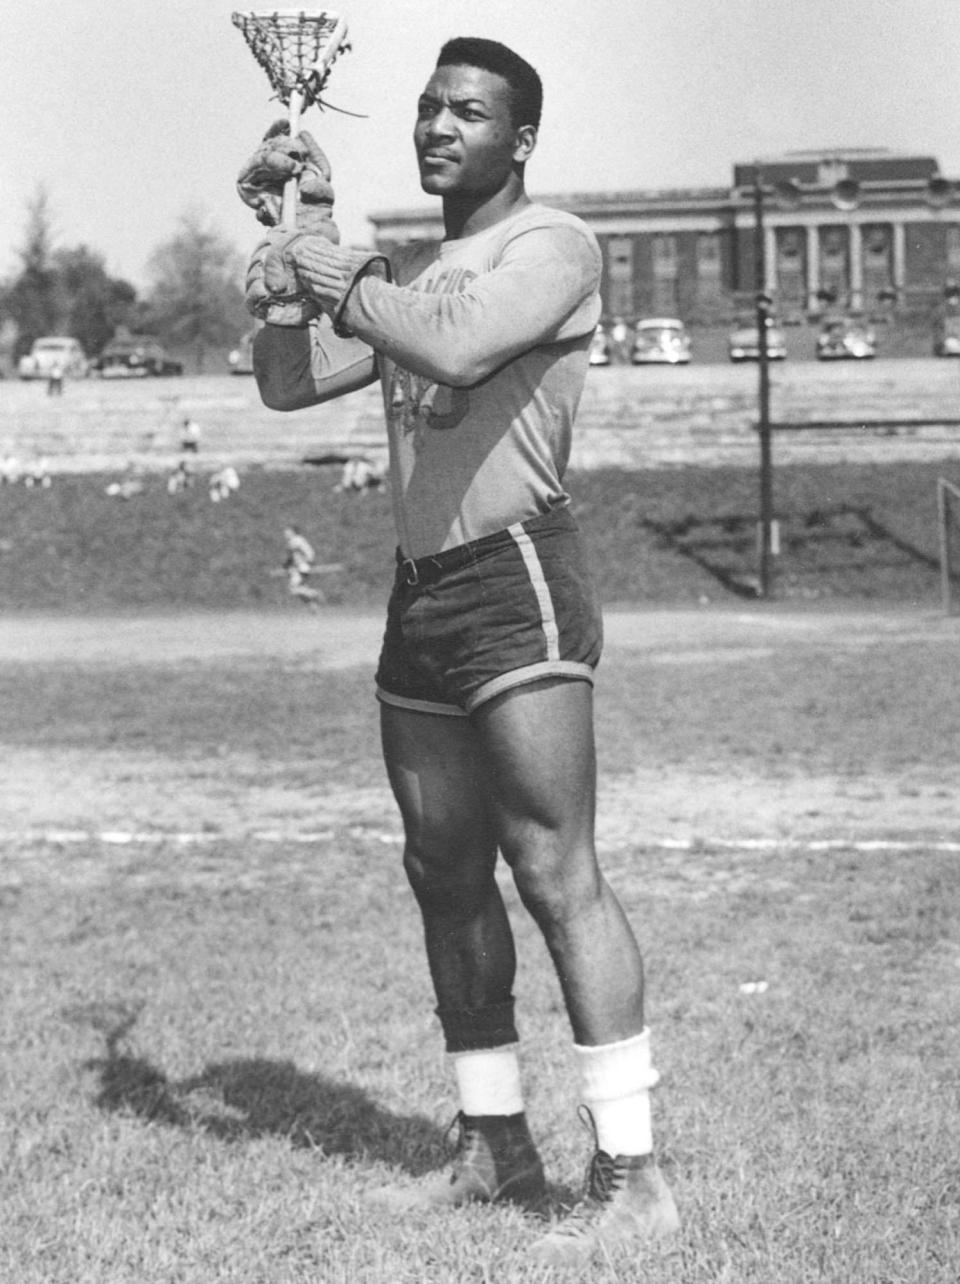 Jim Brown is shown playing in his last college lacrosse game for Syracuse University in this 1957 photo from Syracuse University.